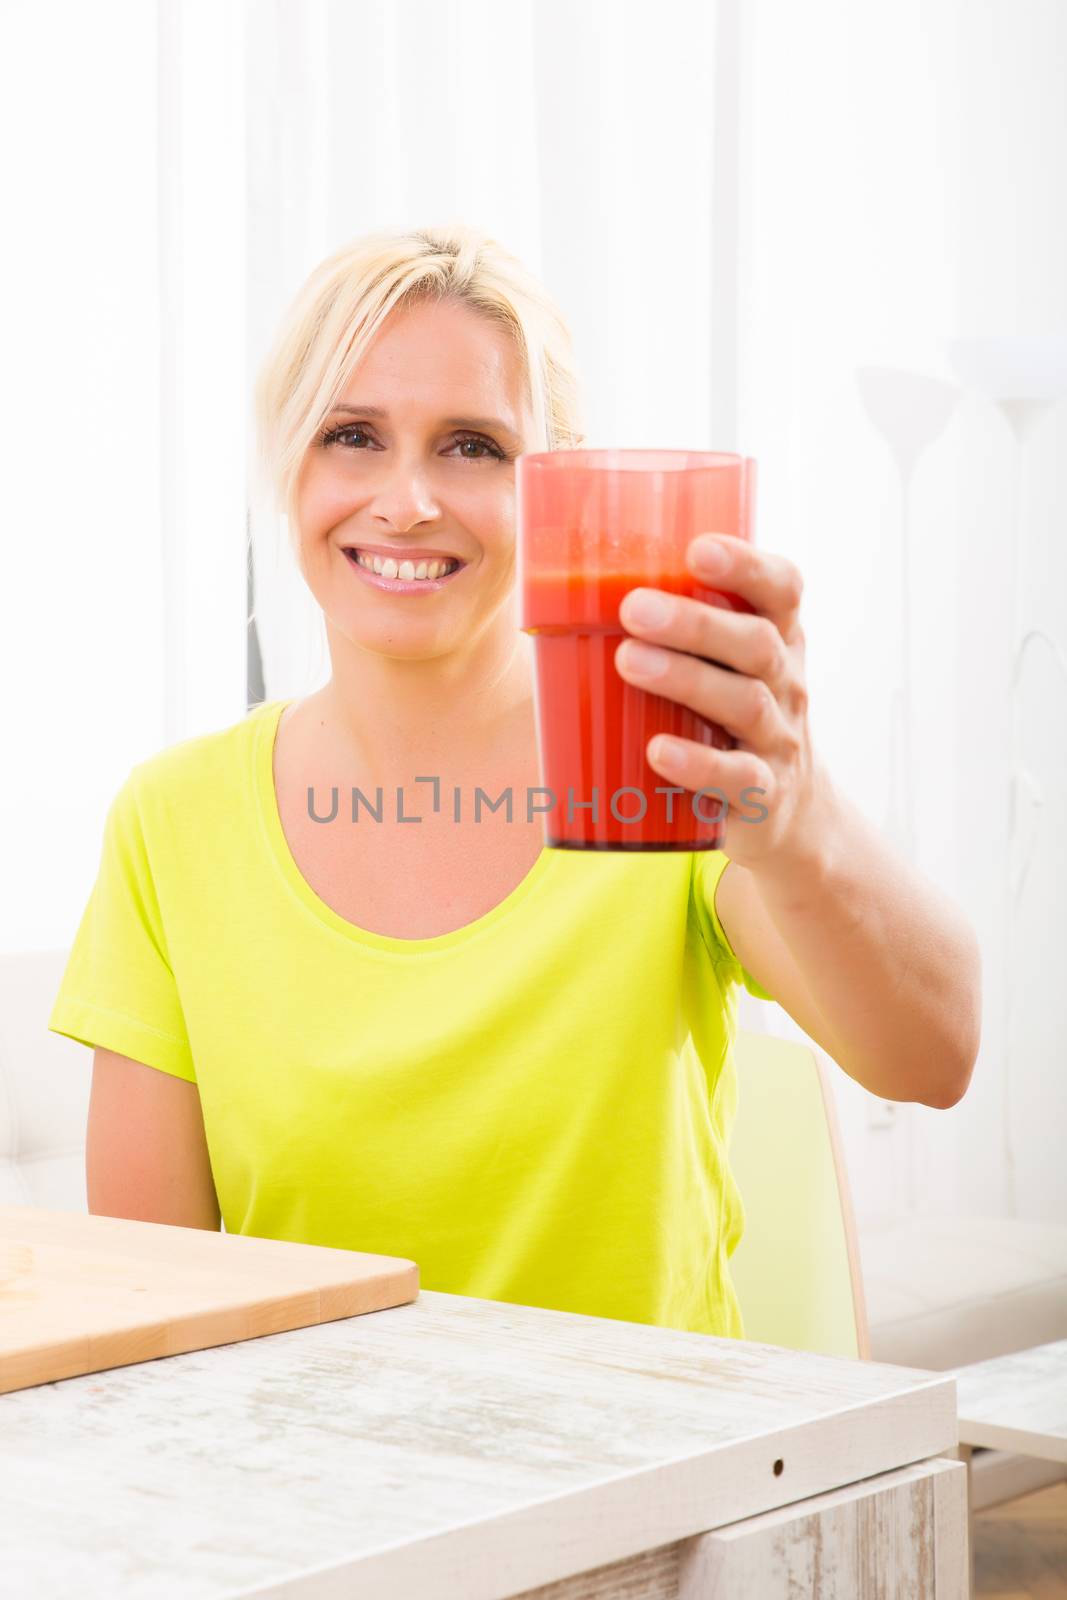 Mature woman enjoying a smoothie			 by Spectral